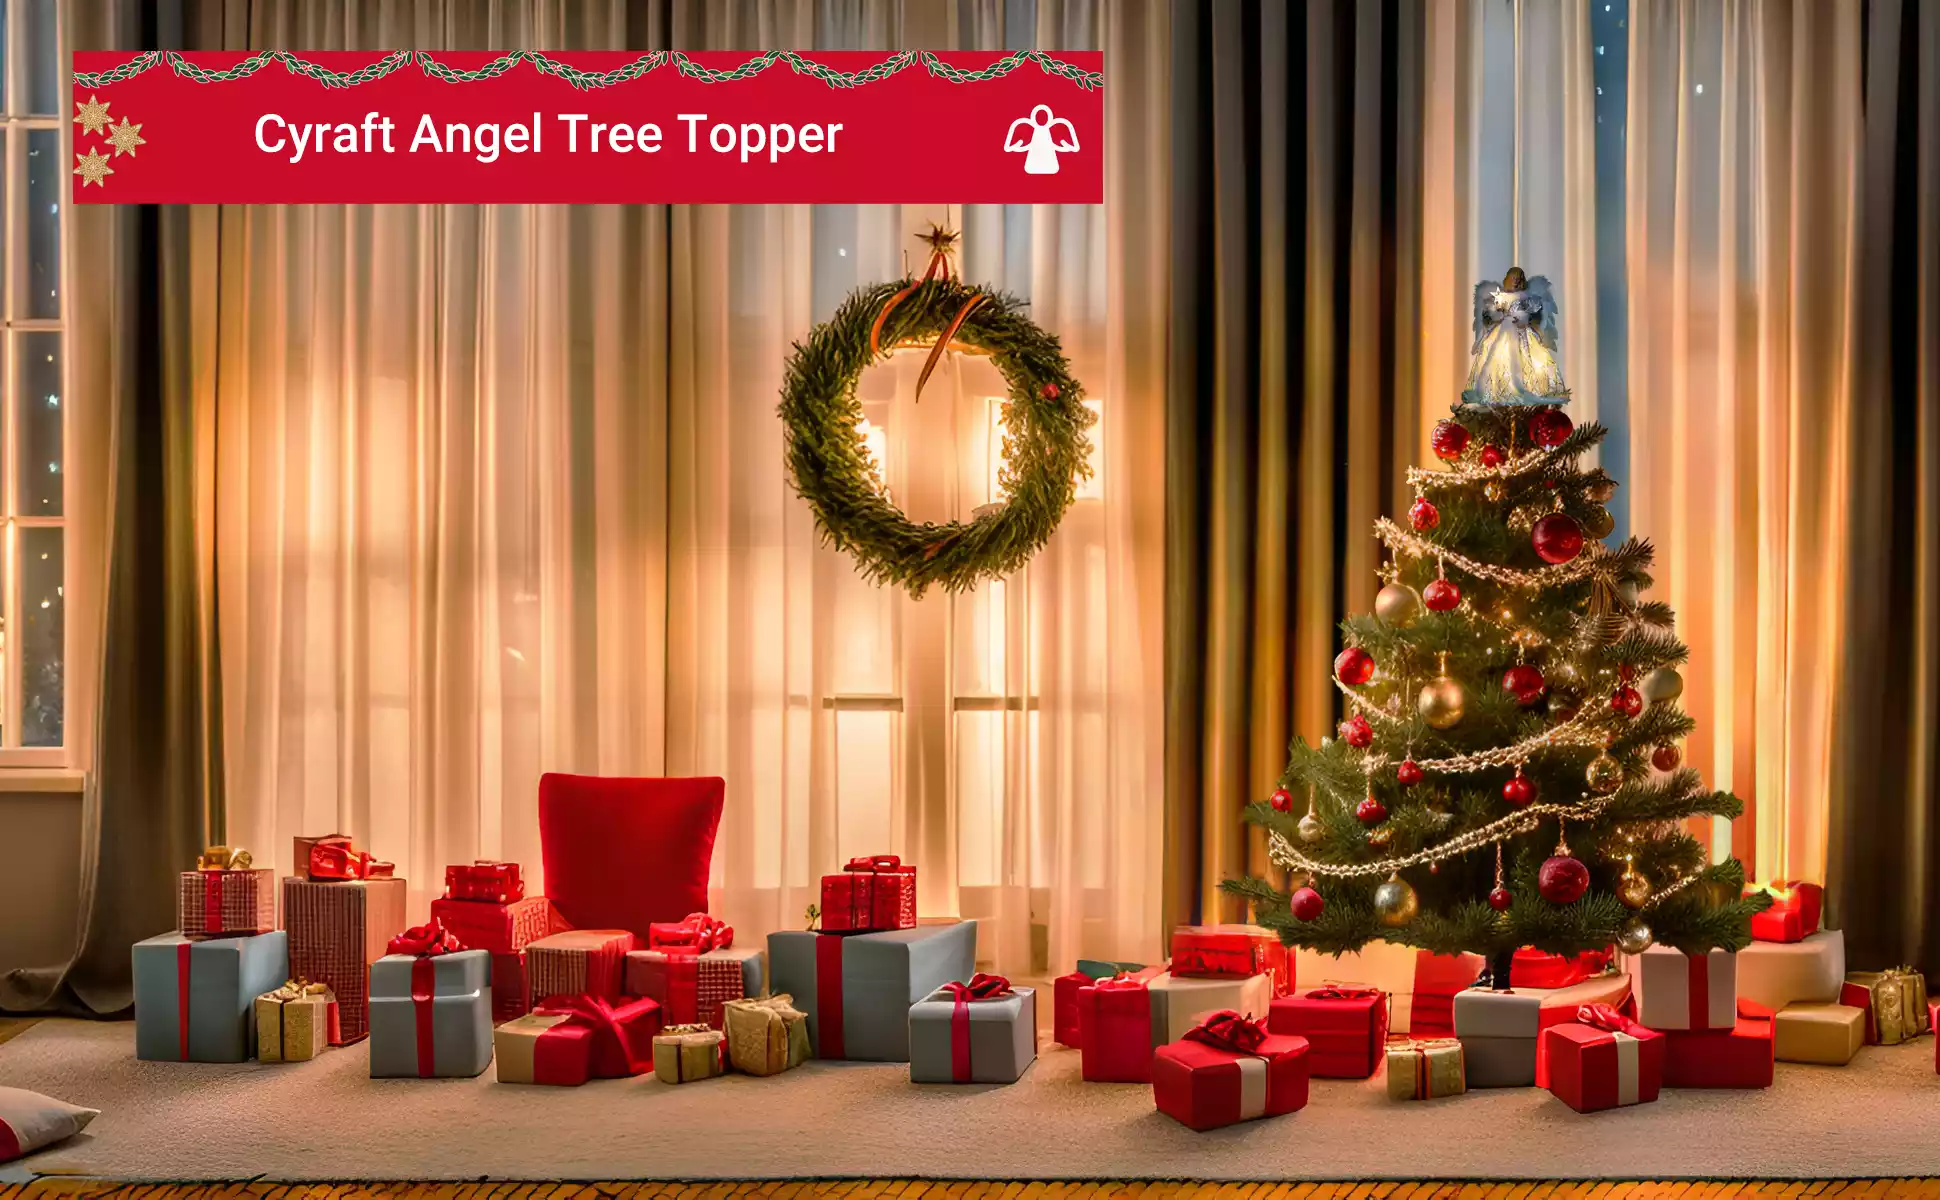 A white angel tree topper on the top of the tree glows in a Christmas-decorated room at night